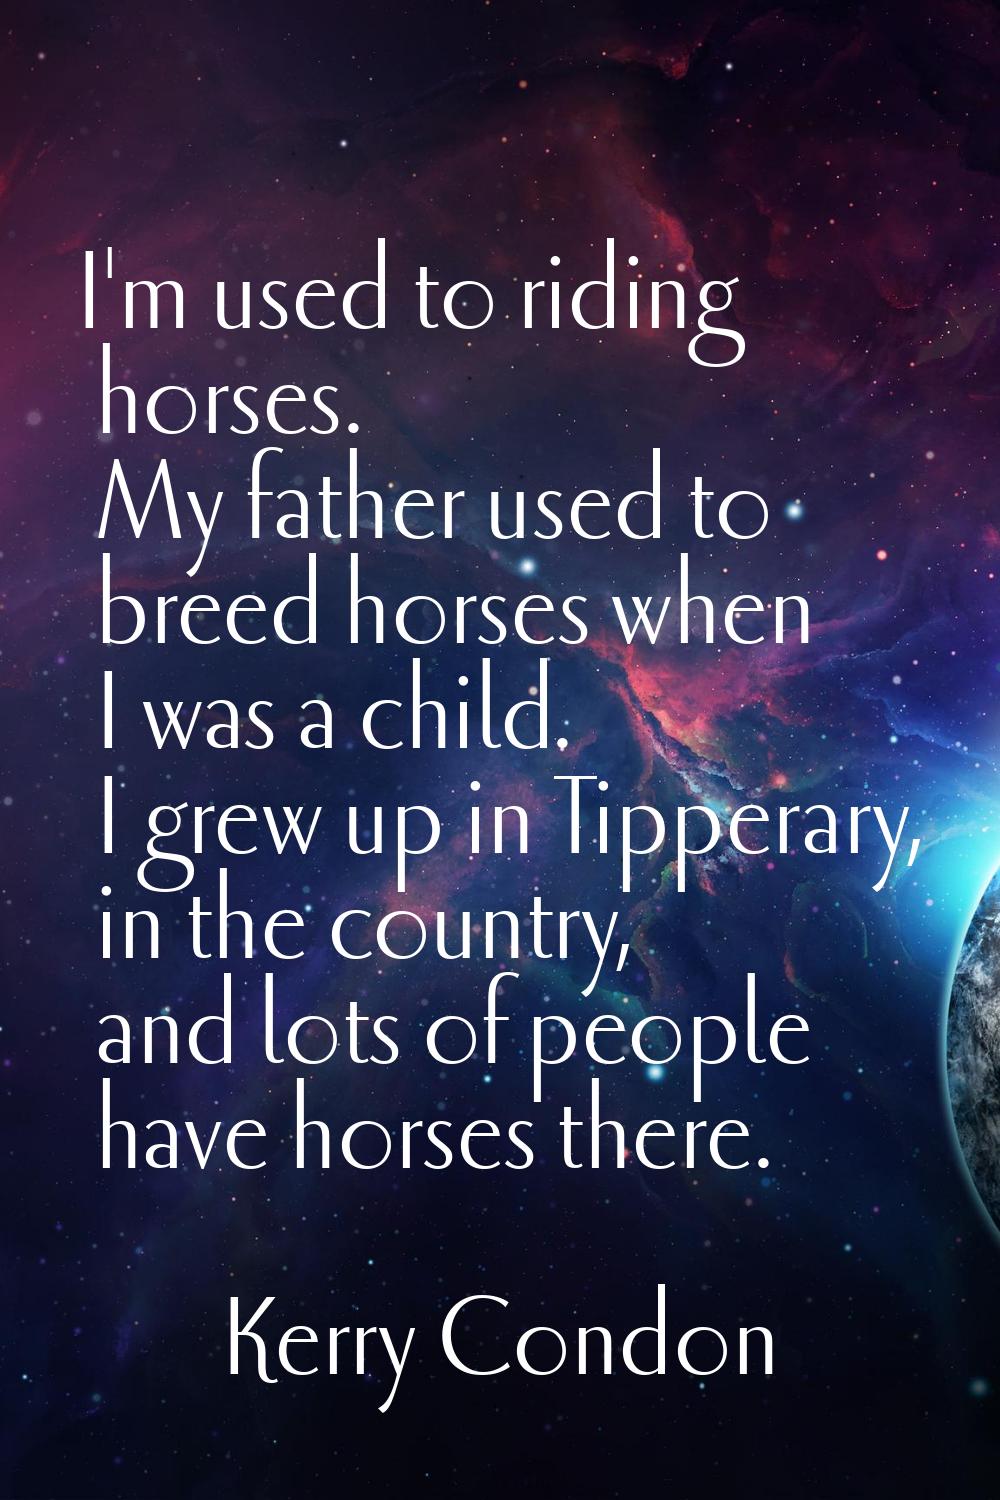 I'm used to riding horses. My father used to breed horses when I was a child. I grew up in Tipperar